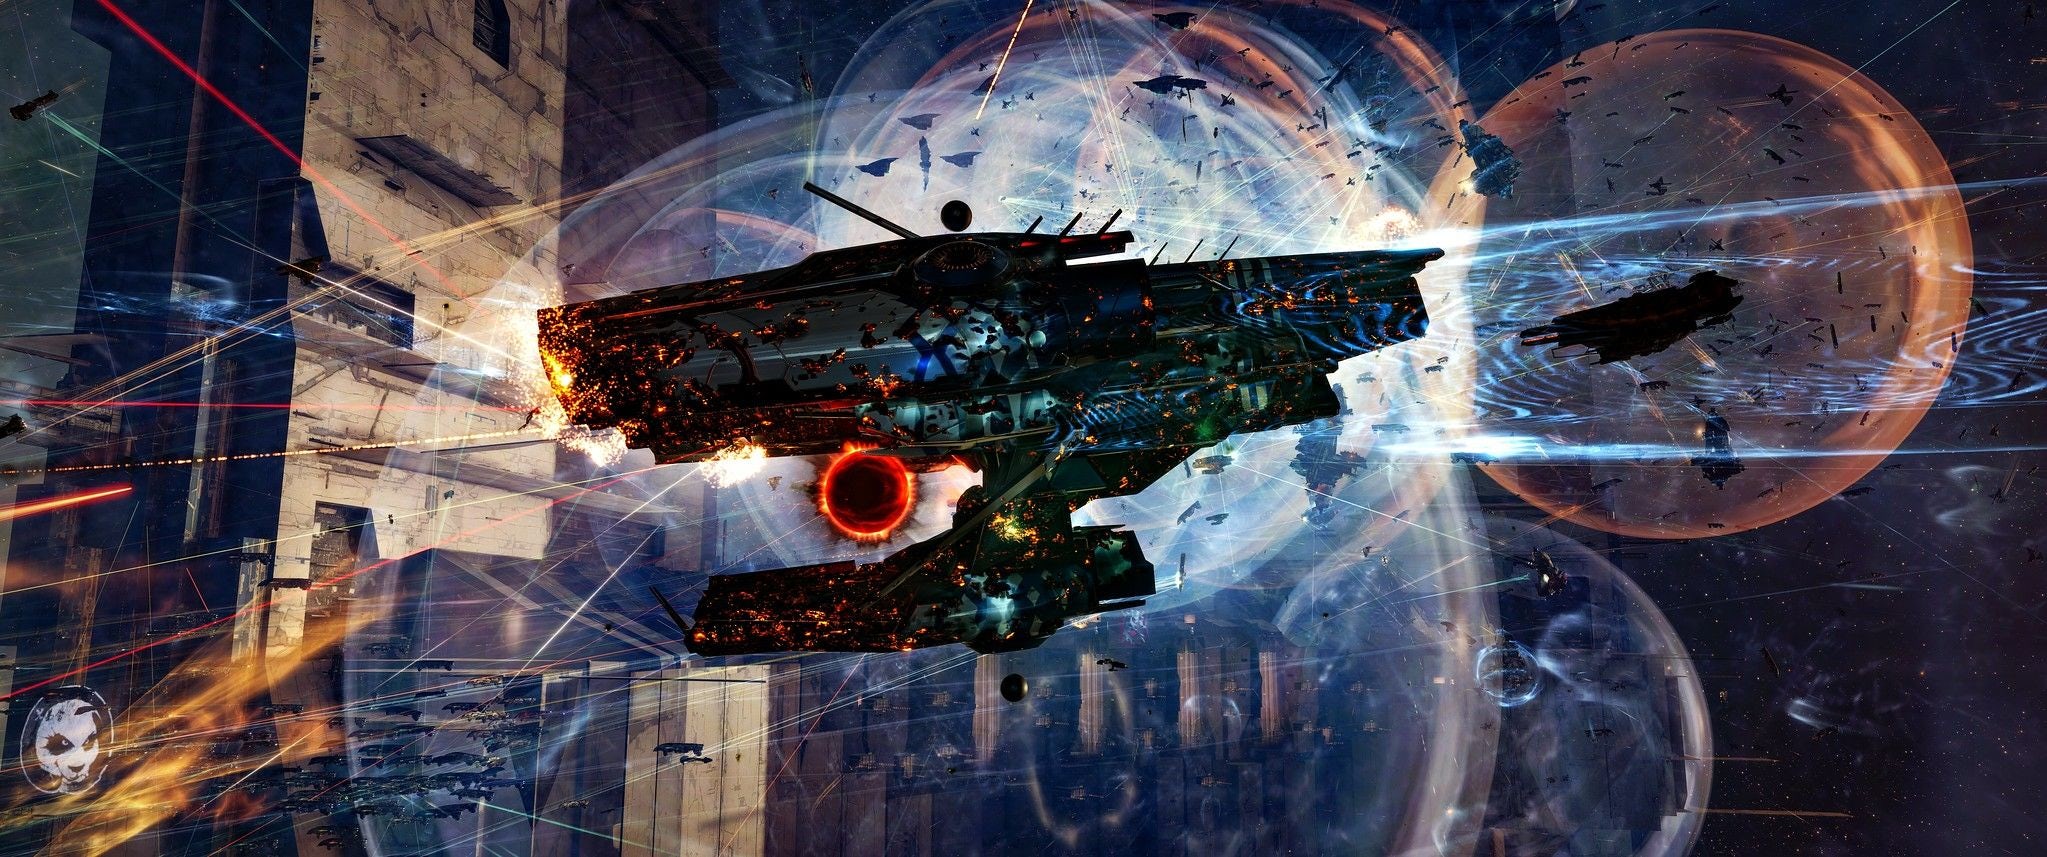 What was your EVE Online highlight of the year? Tell us about it for $4!